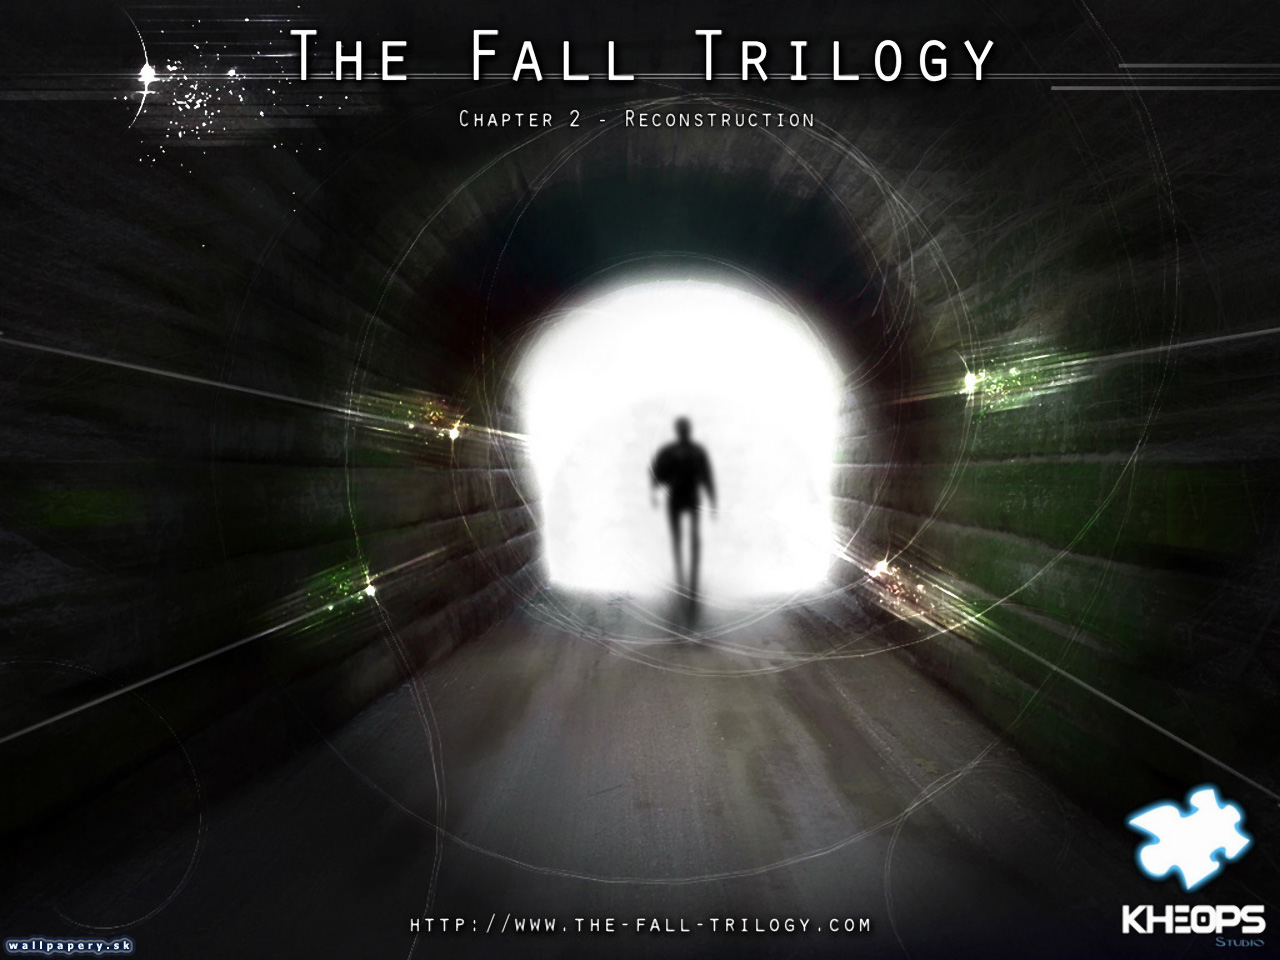 The Fall Trilogy - Chapter 2: Reconstruction - wallpaper 1